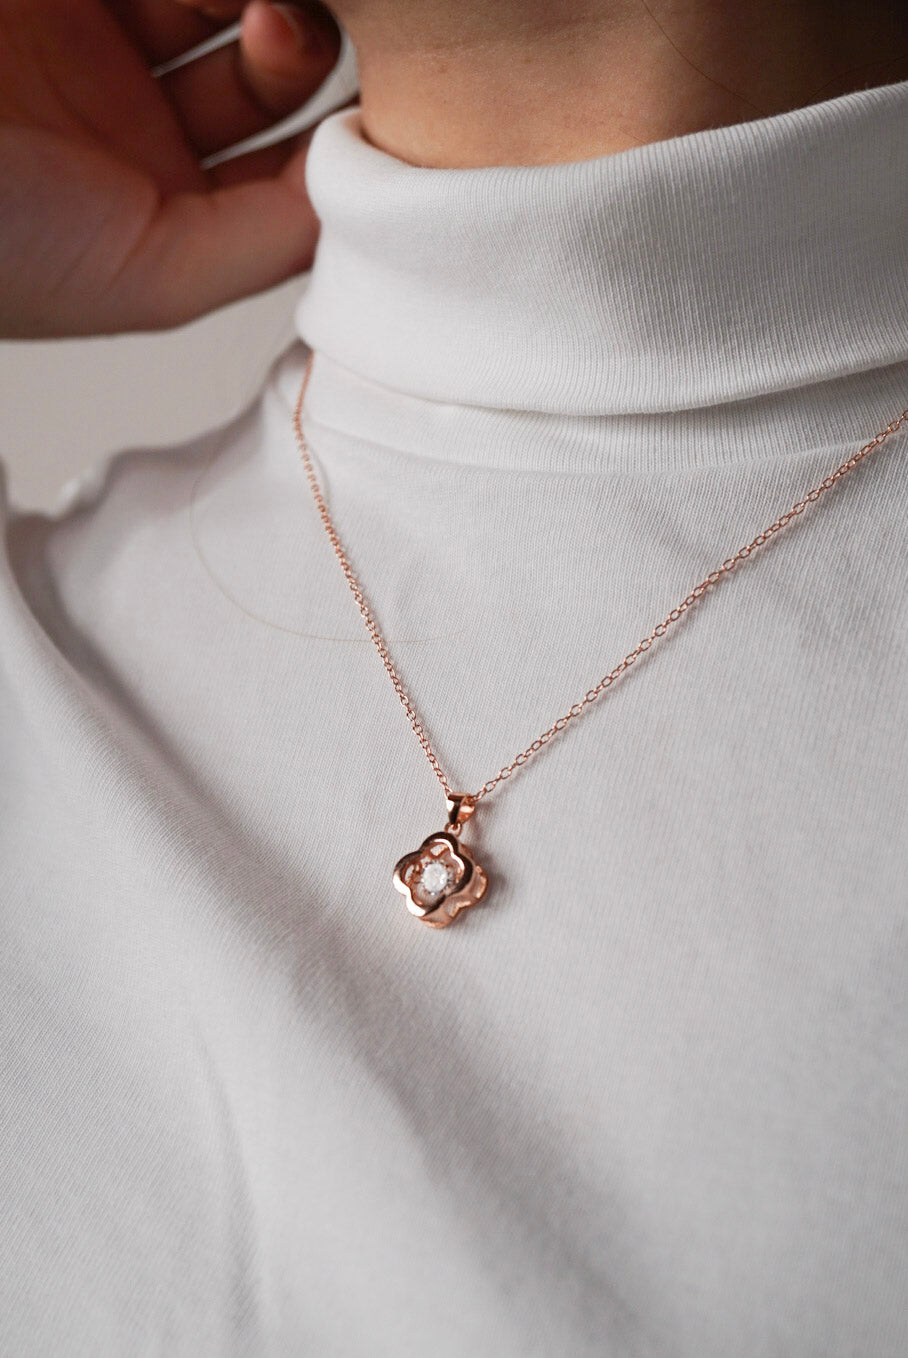 Rose gold dancing diamond clover necklace